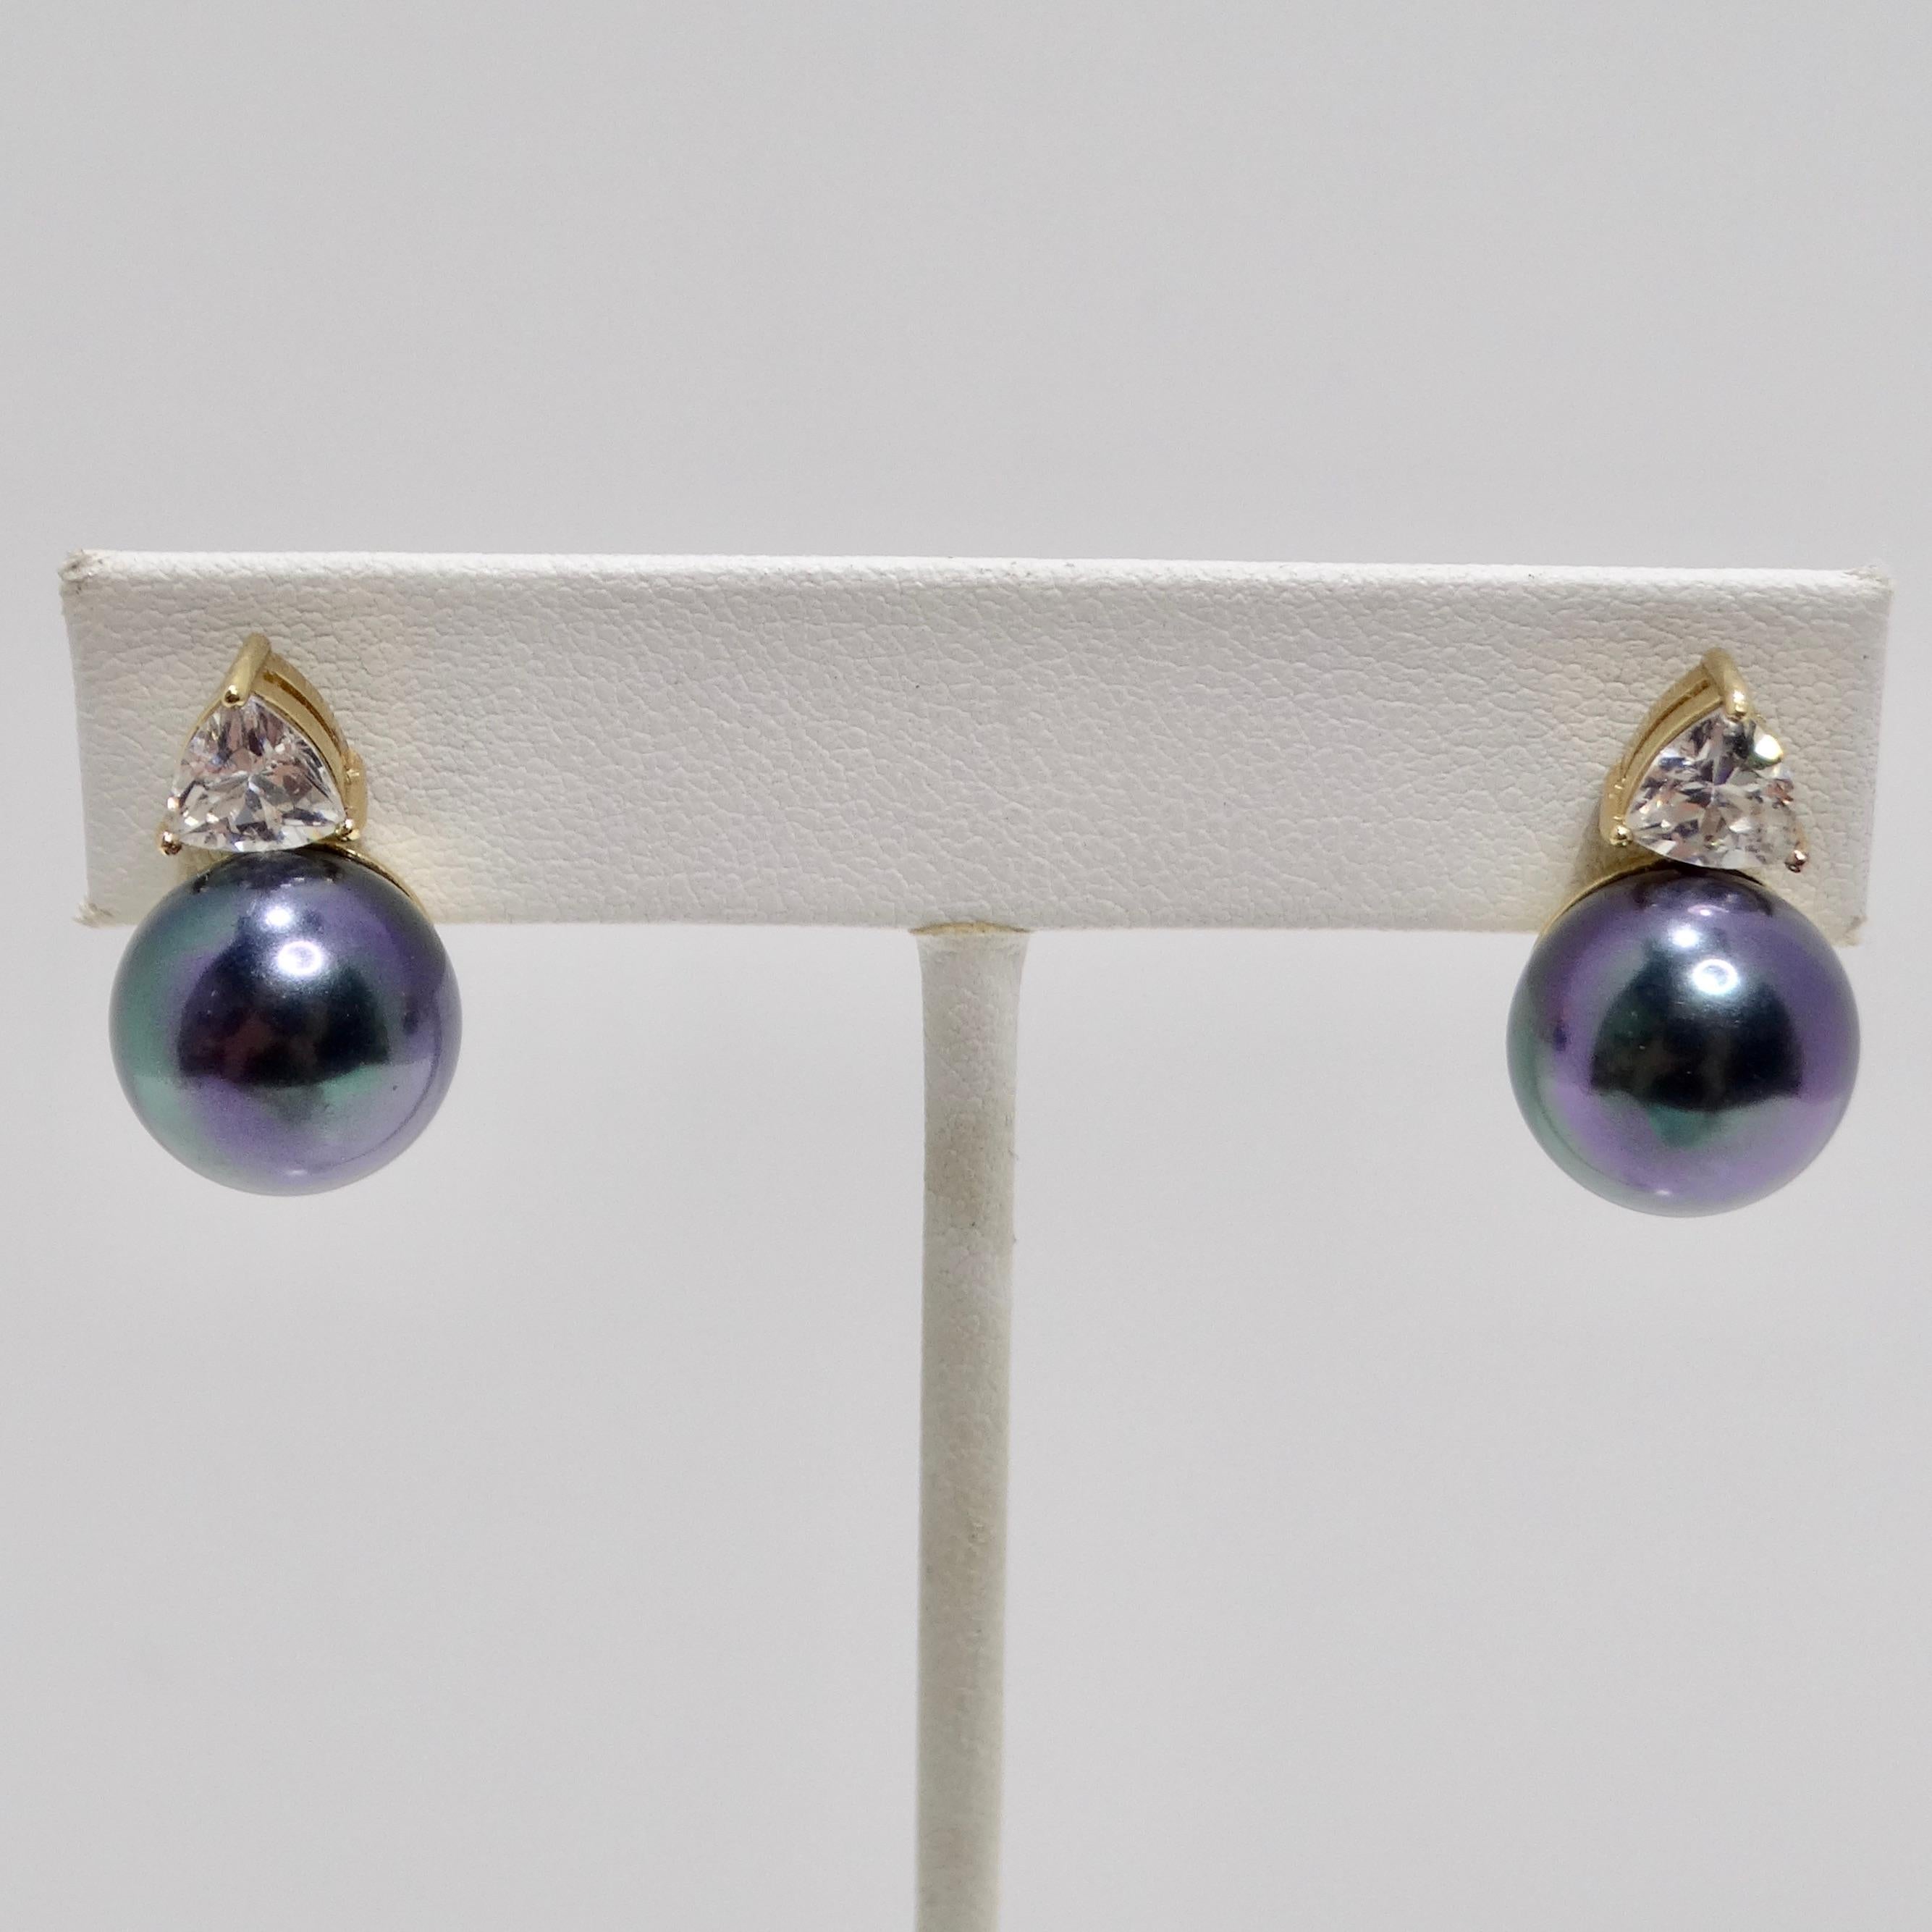 1980s Iridescent Pearl Rhinestone Earrings In Good Condition For Sale In Scottsdale, AZ